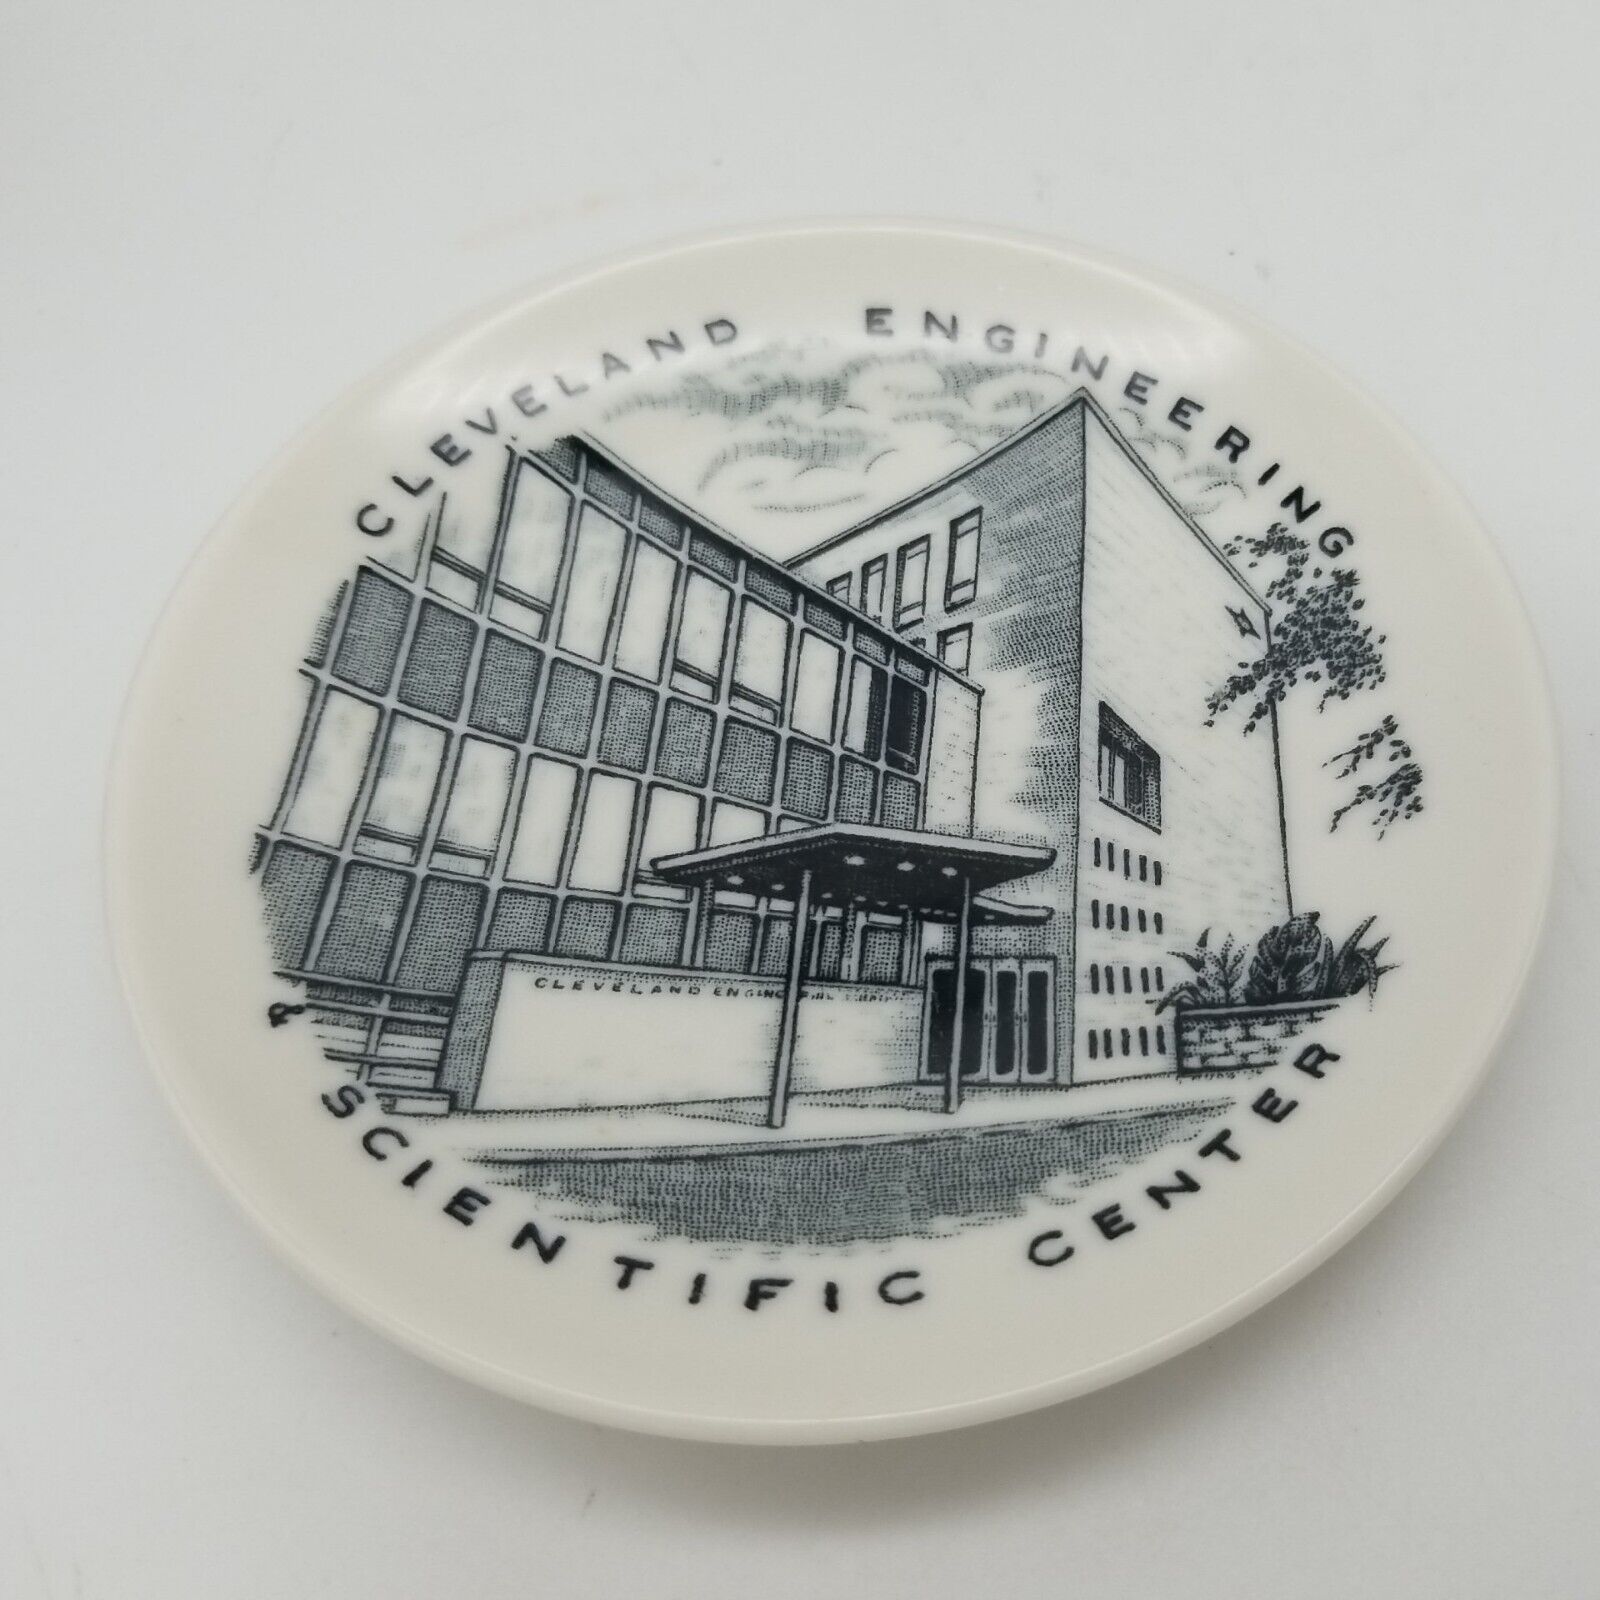 Cleveland Engineering Scientific Center Walker China plate Bedford Ohio CESC USA